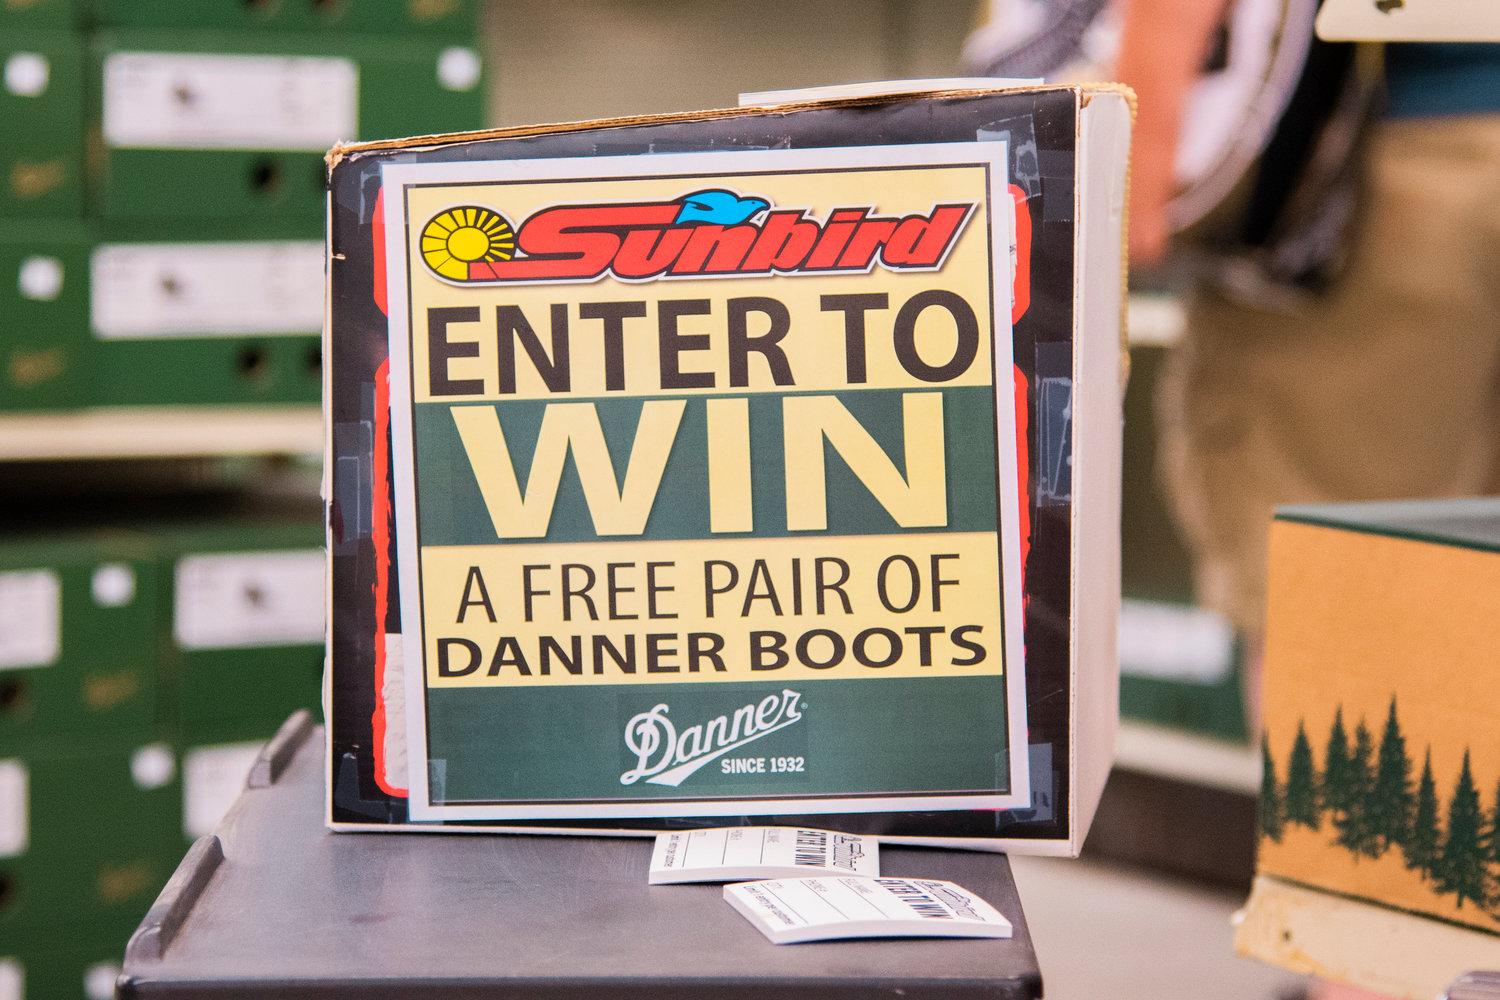 Customers can "Enter to win a free pair of Danner Boots," at the Sunbird Shopping Center in Chehalis.